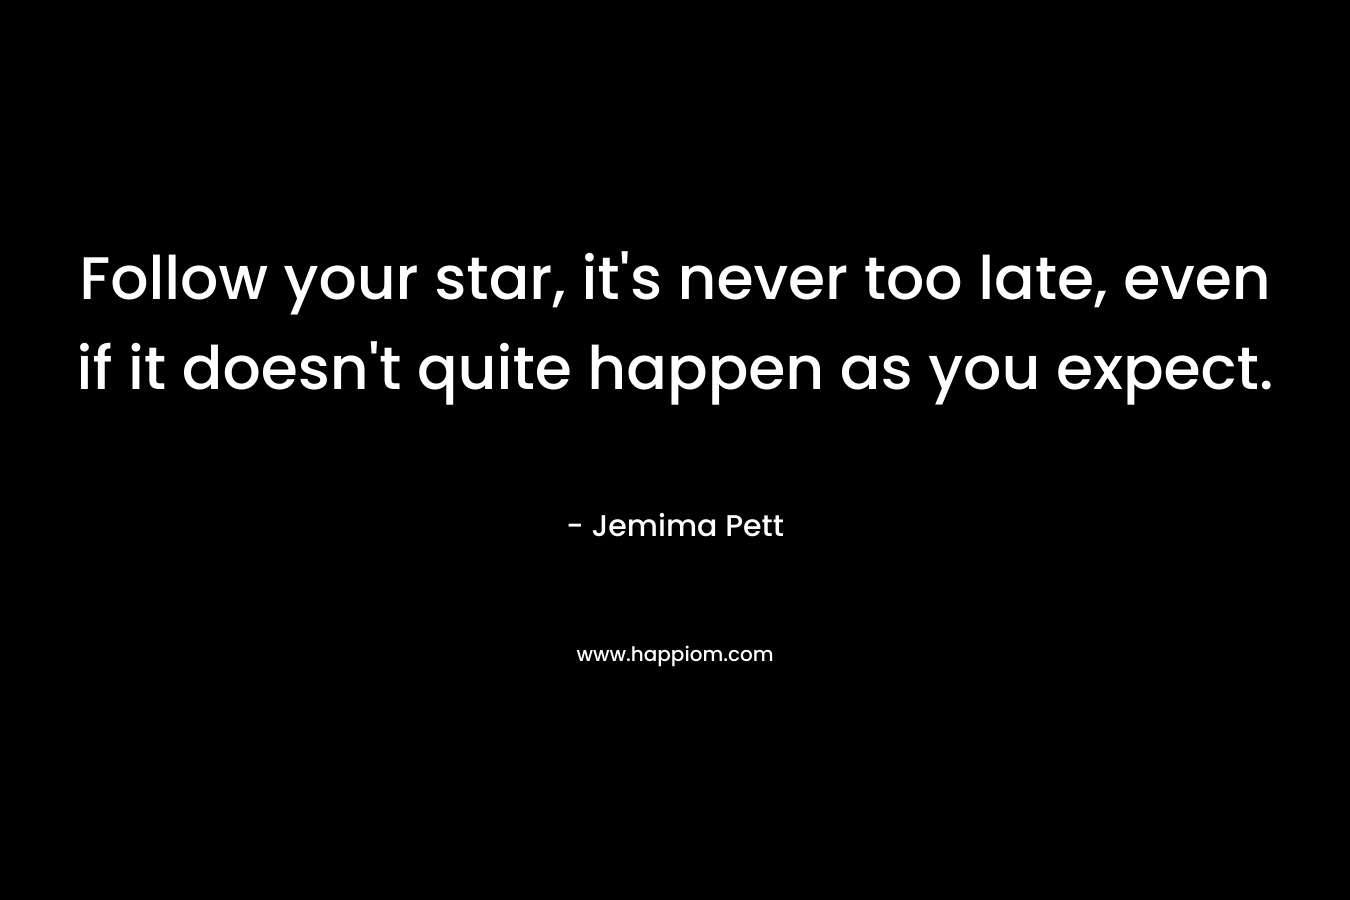 Follow your star, it’s never too late, even if it doesn’t quite happen as you expect. – Jemima Pett